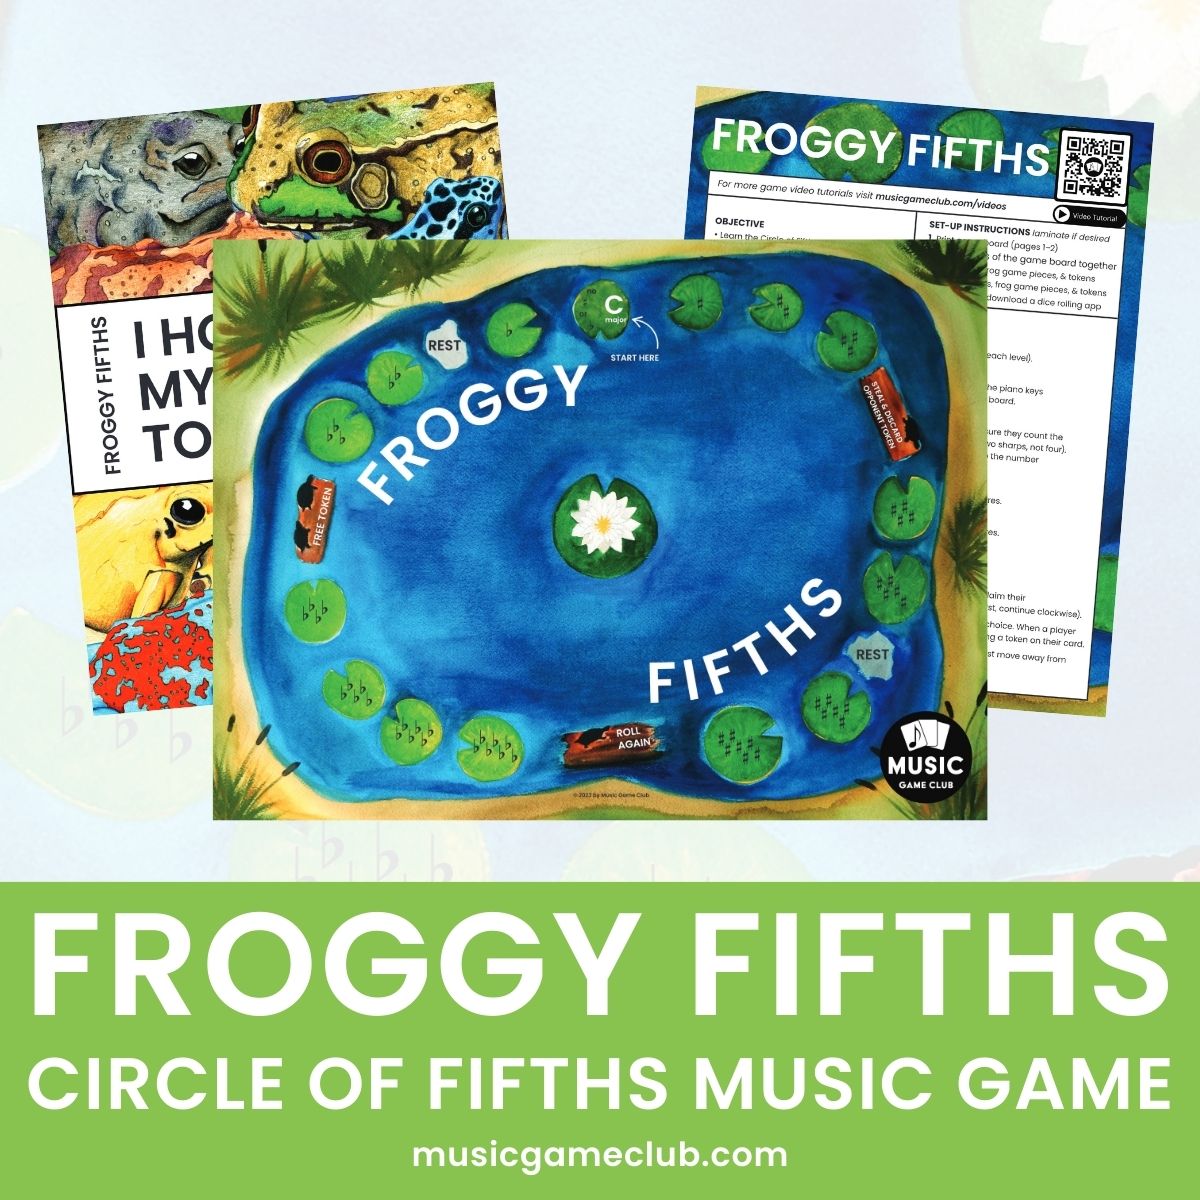 Froggy Fifths Circle of Fifths Music Game